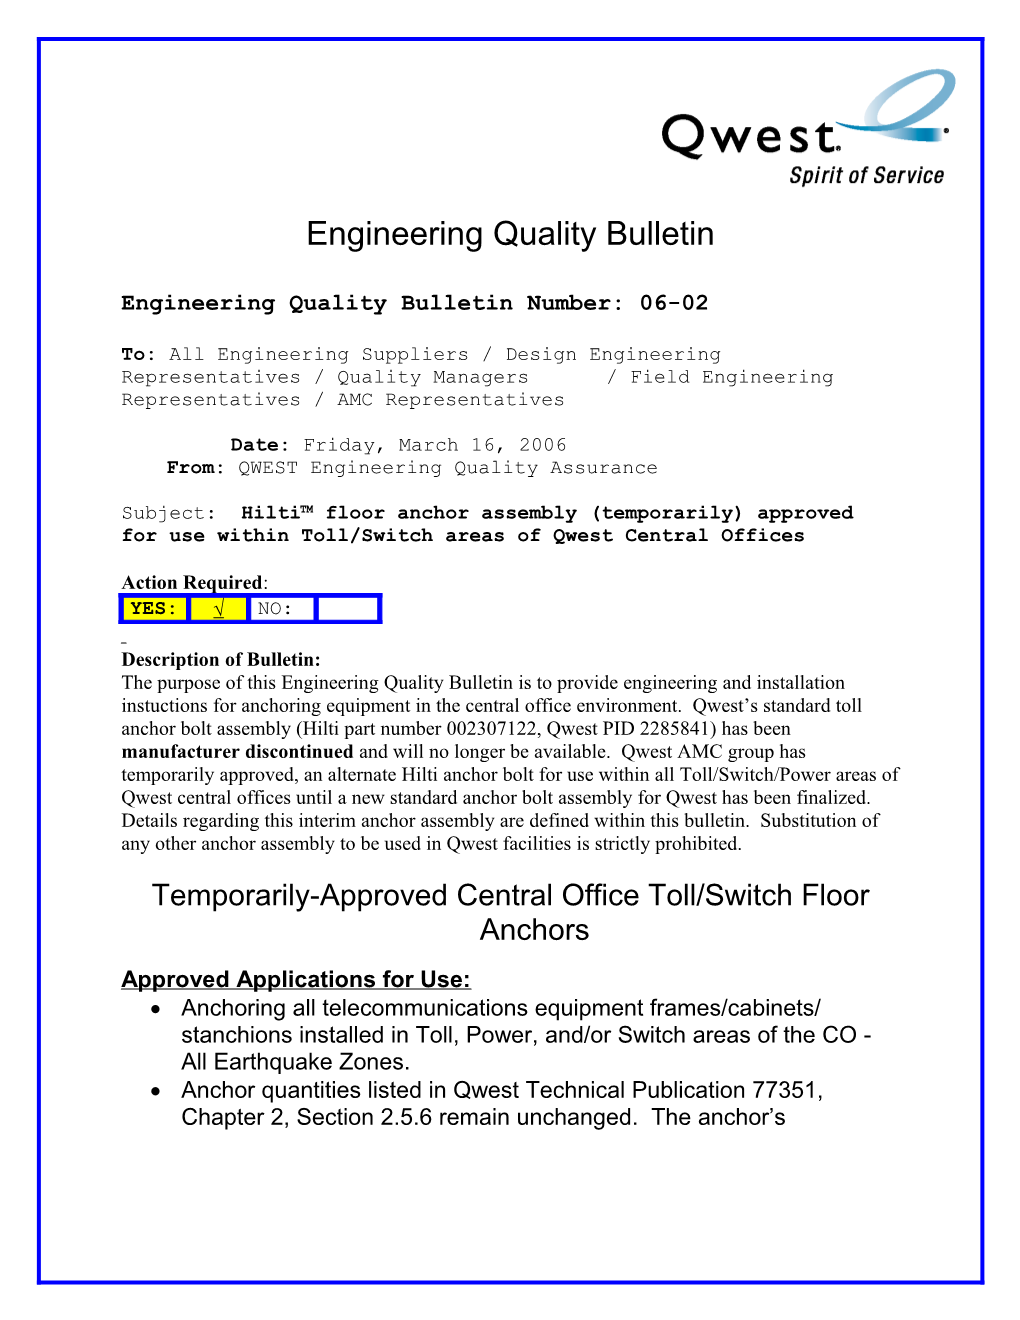 Engineering Quality Bulletin Number: 06-02